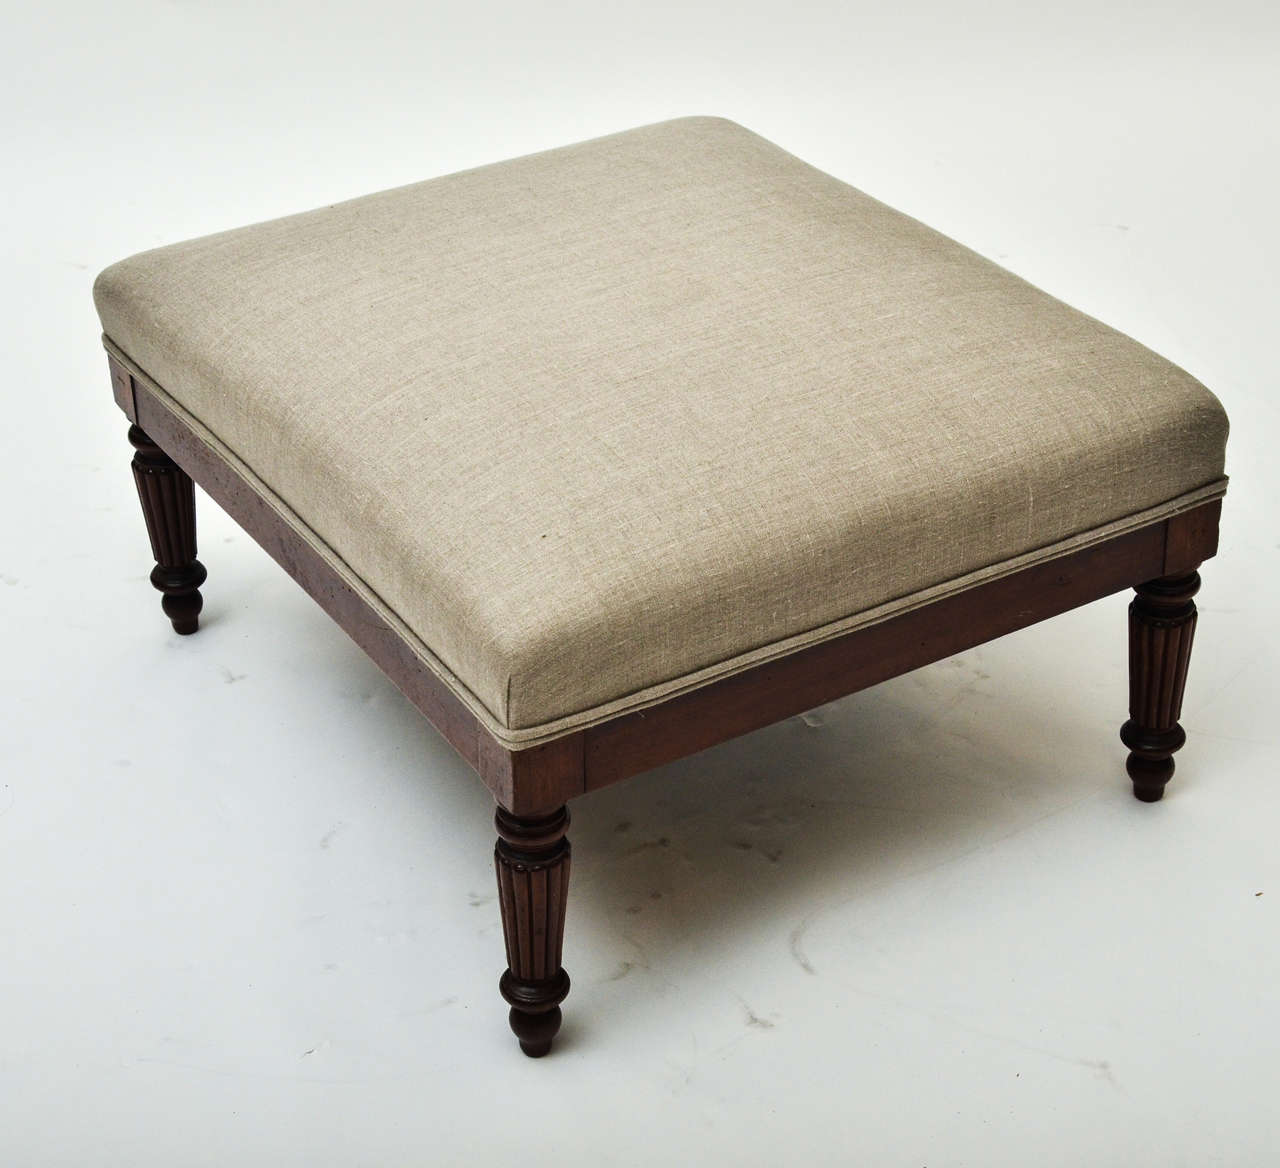 An early 19th century upholstered stool with turned and fluted mahogany legs, and upholstered in linen.